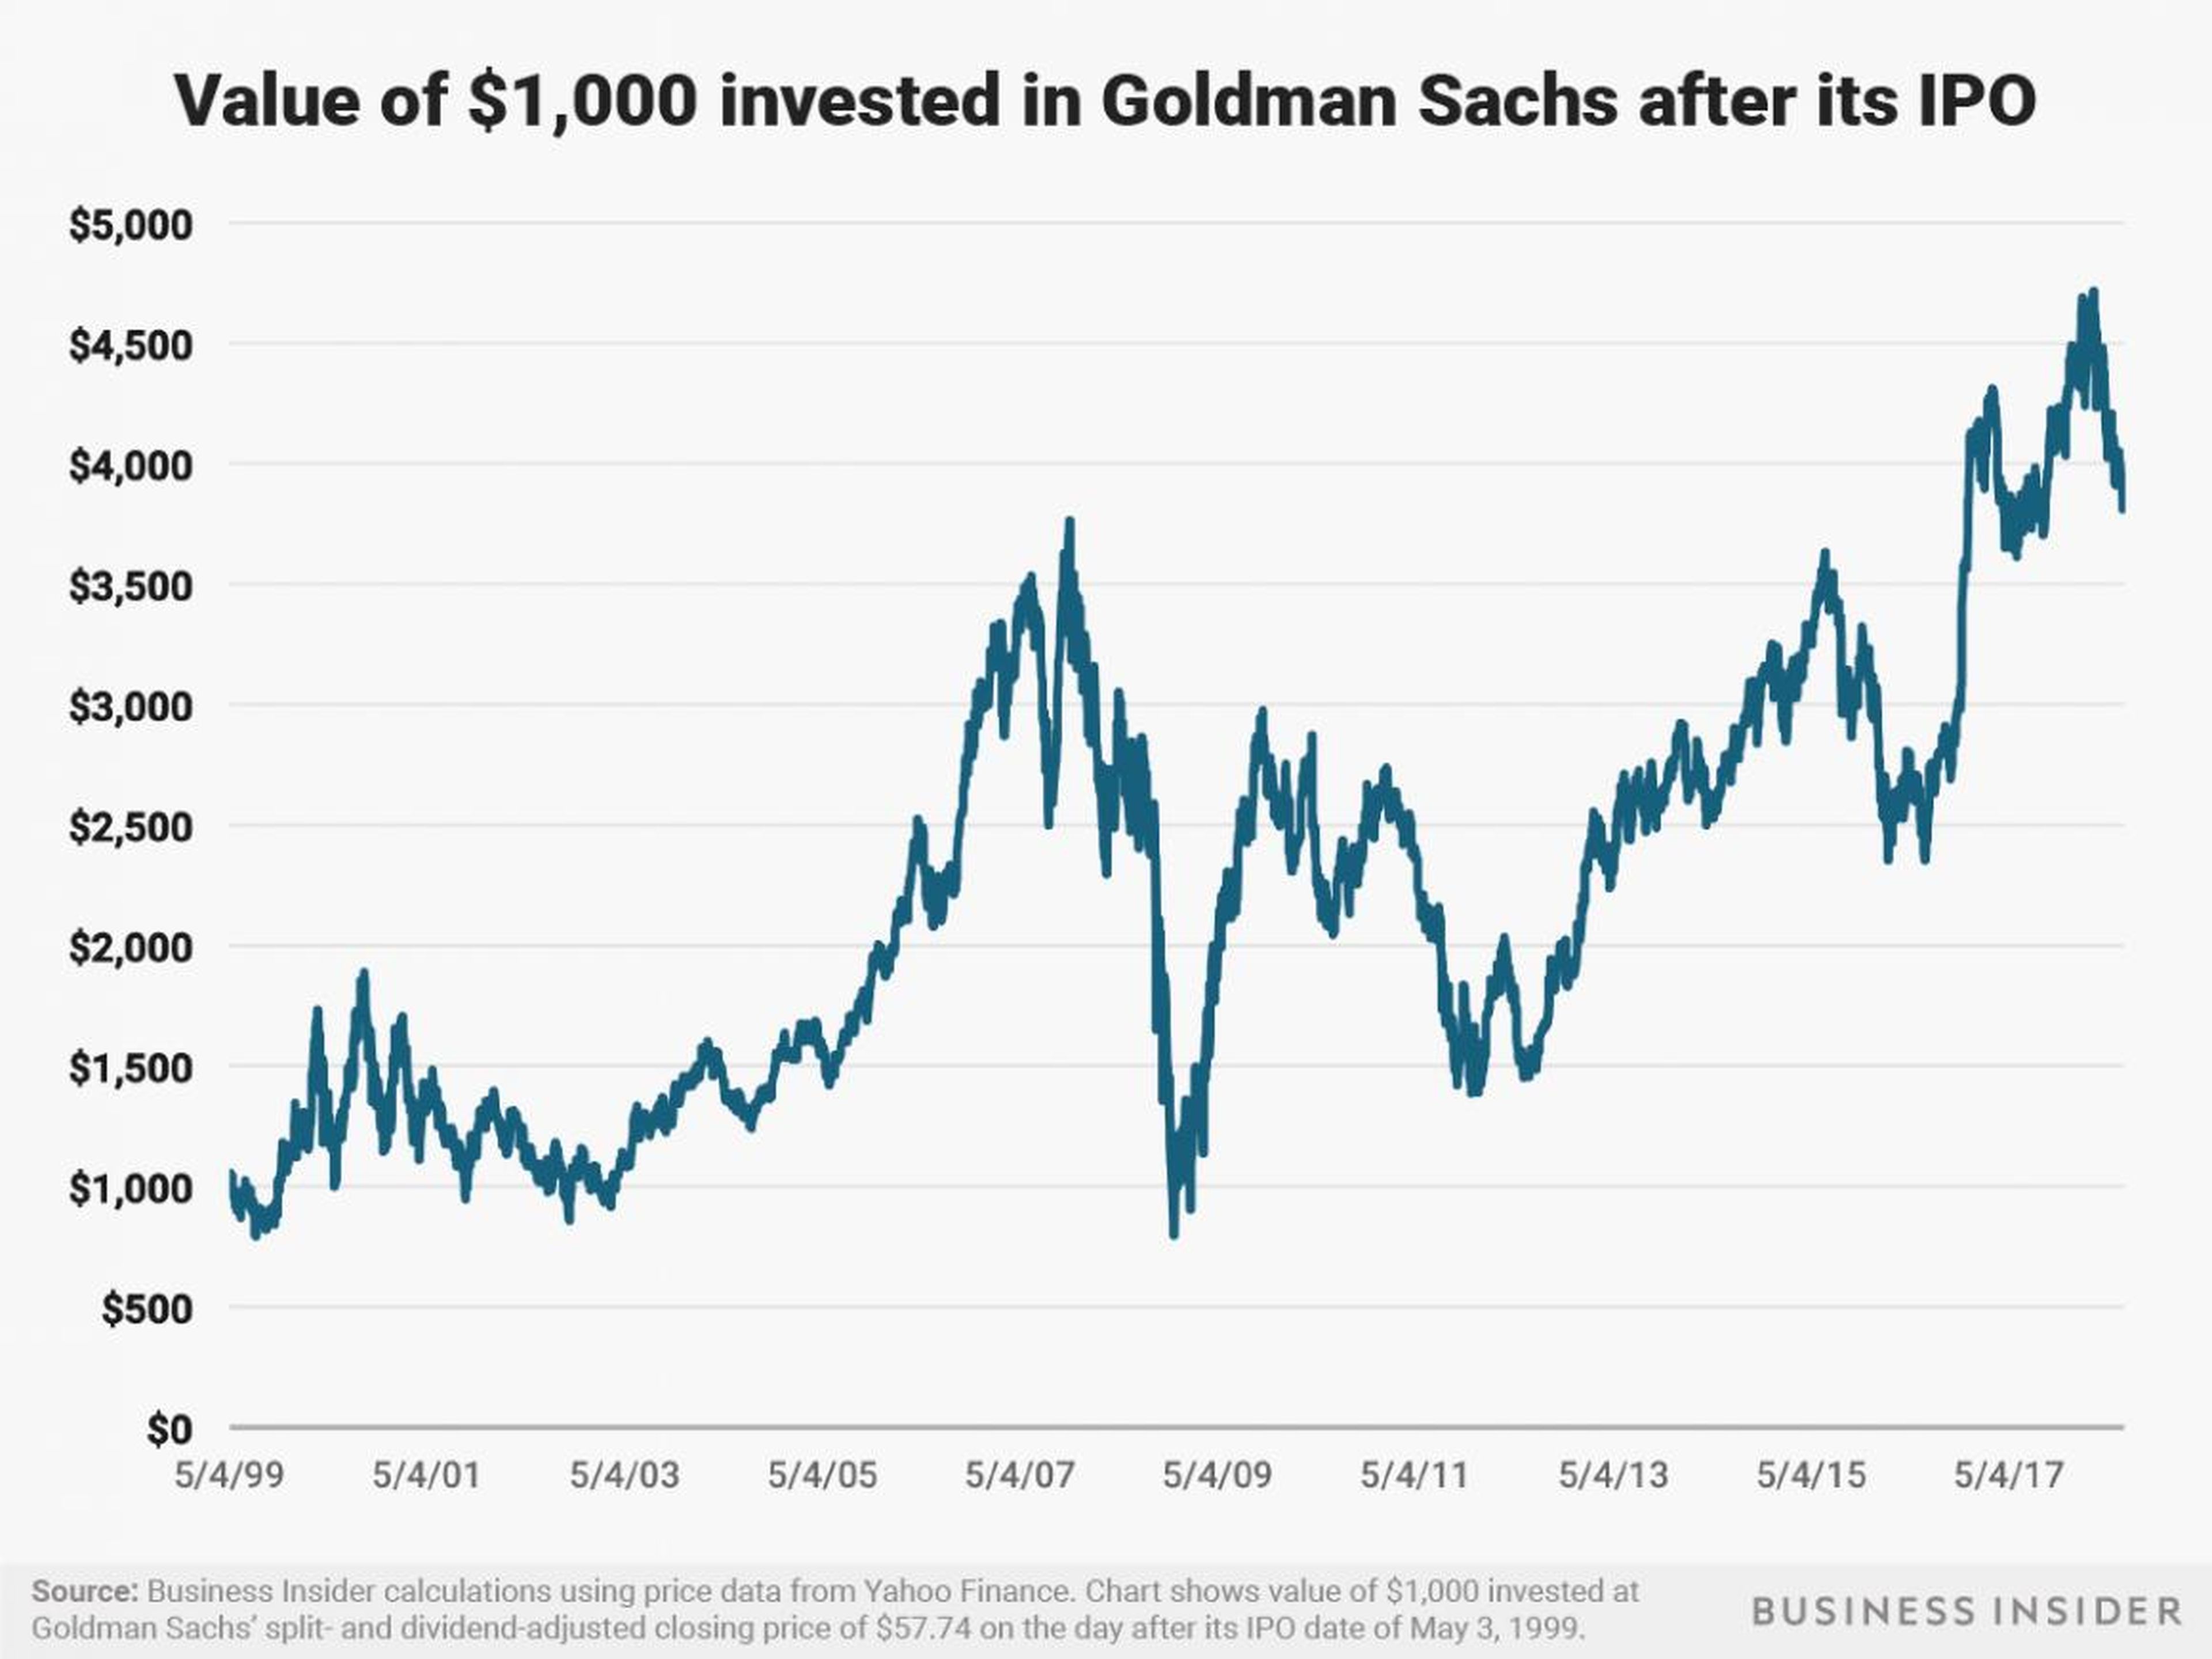 A $1,000 investment in Goldman Sachs after its May 3, 1999 IPO would be worth nearly $4,000 today.